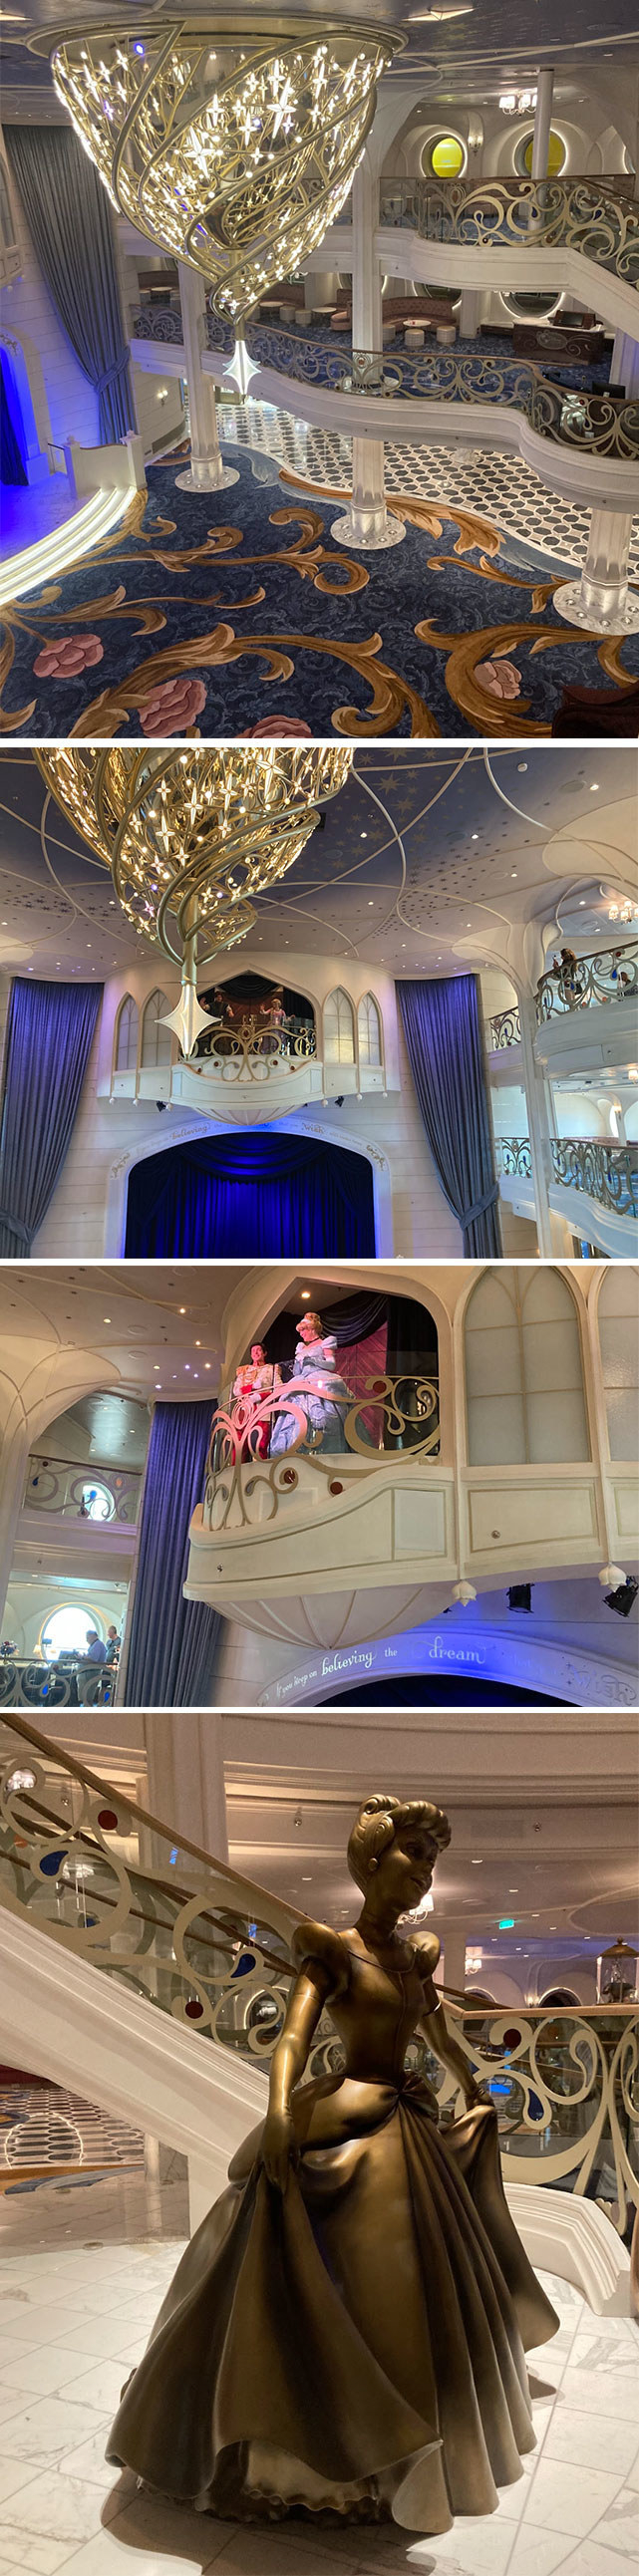 cinderella statue and the chandelier hanging above